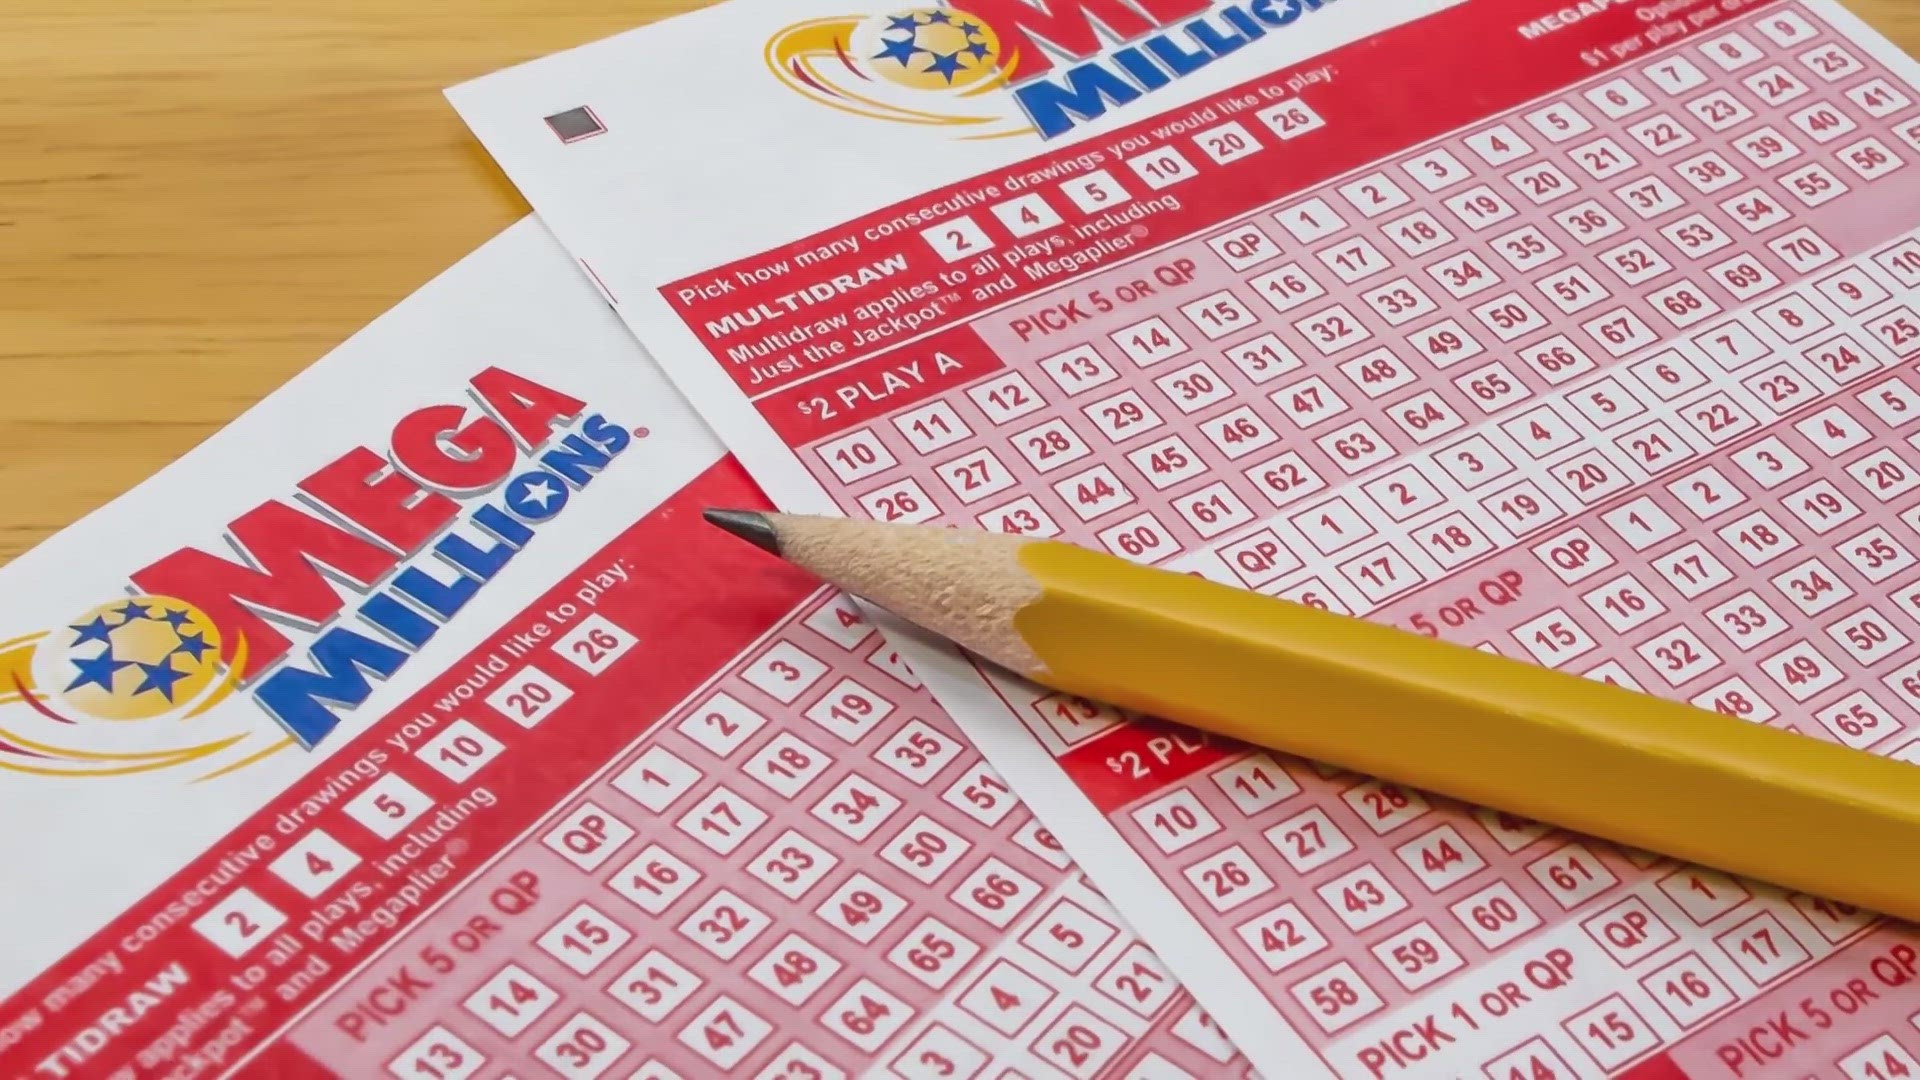 If you're feeling lucky, there are two big lottery jackpots up for grabs this week.